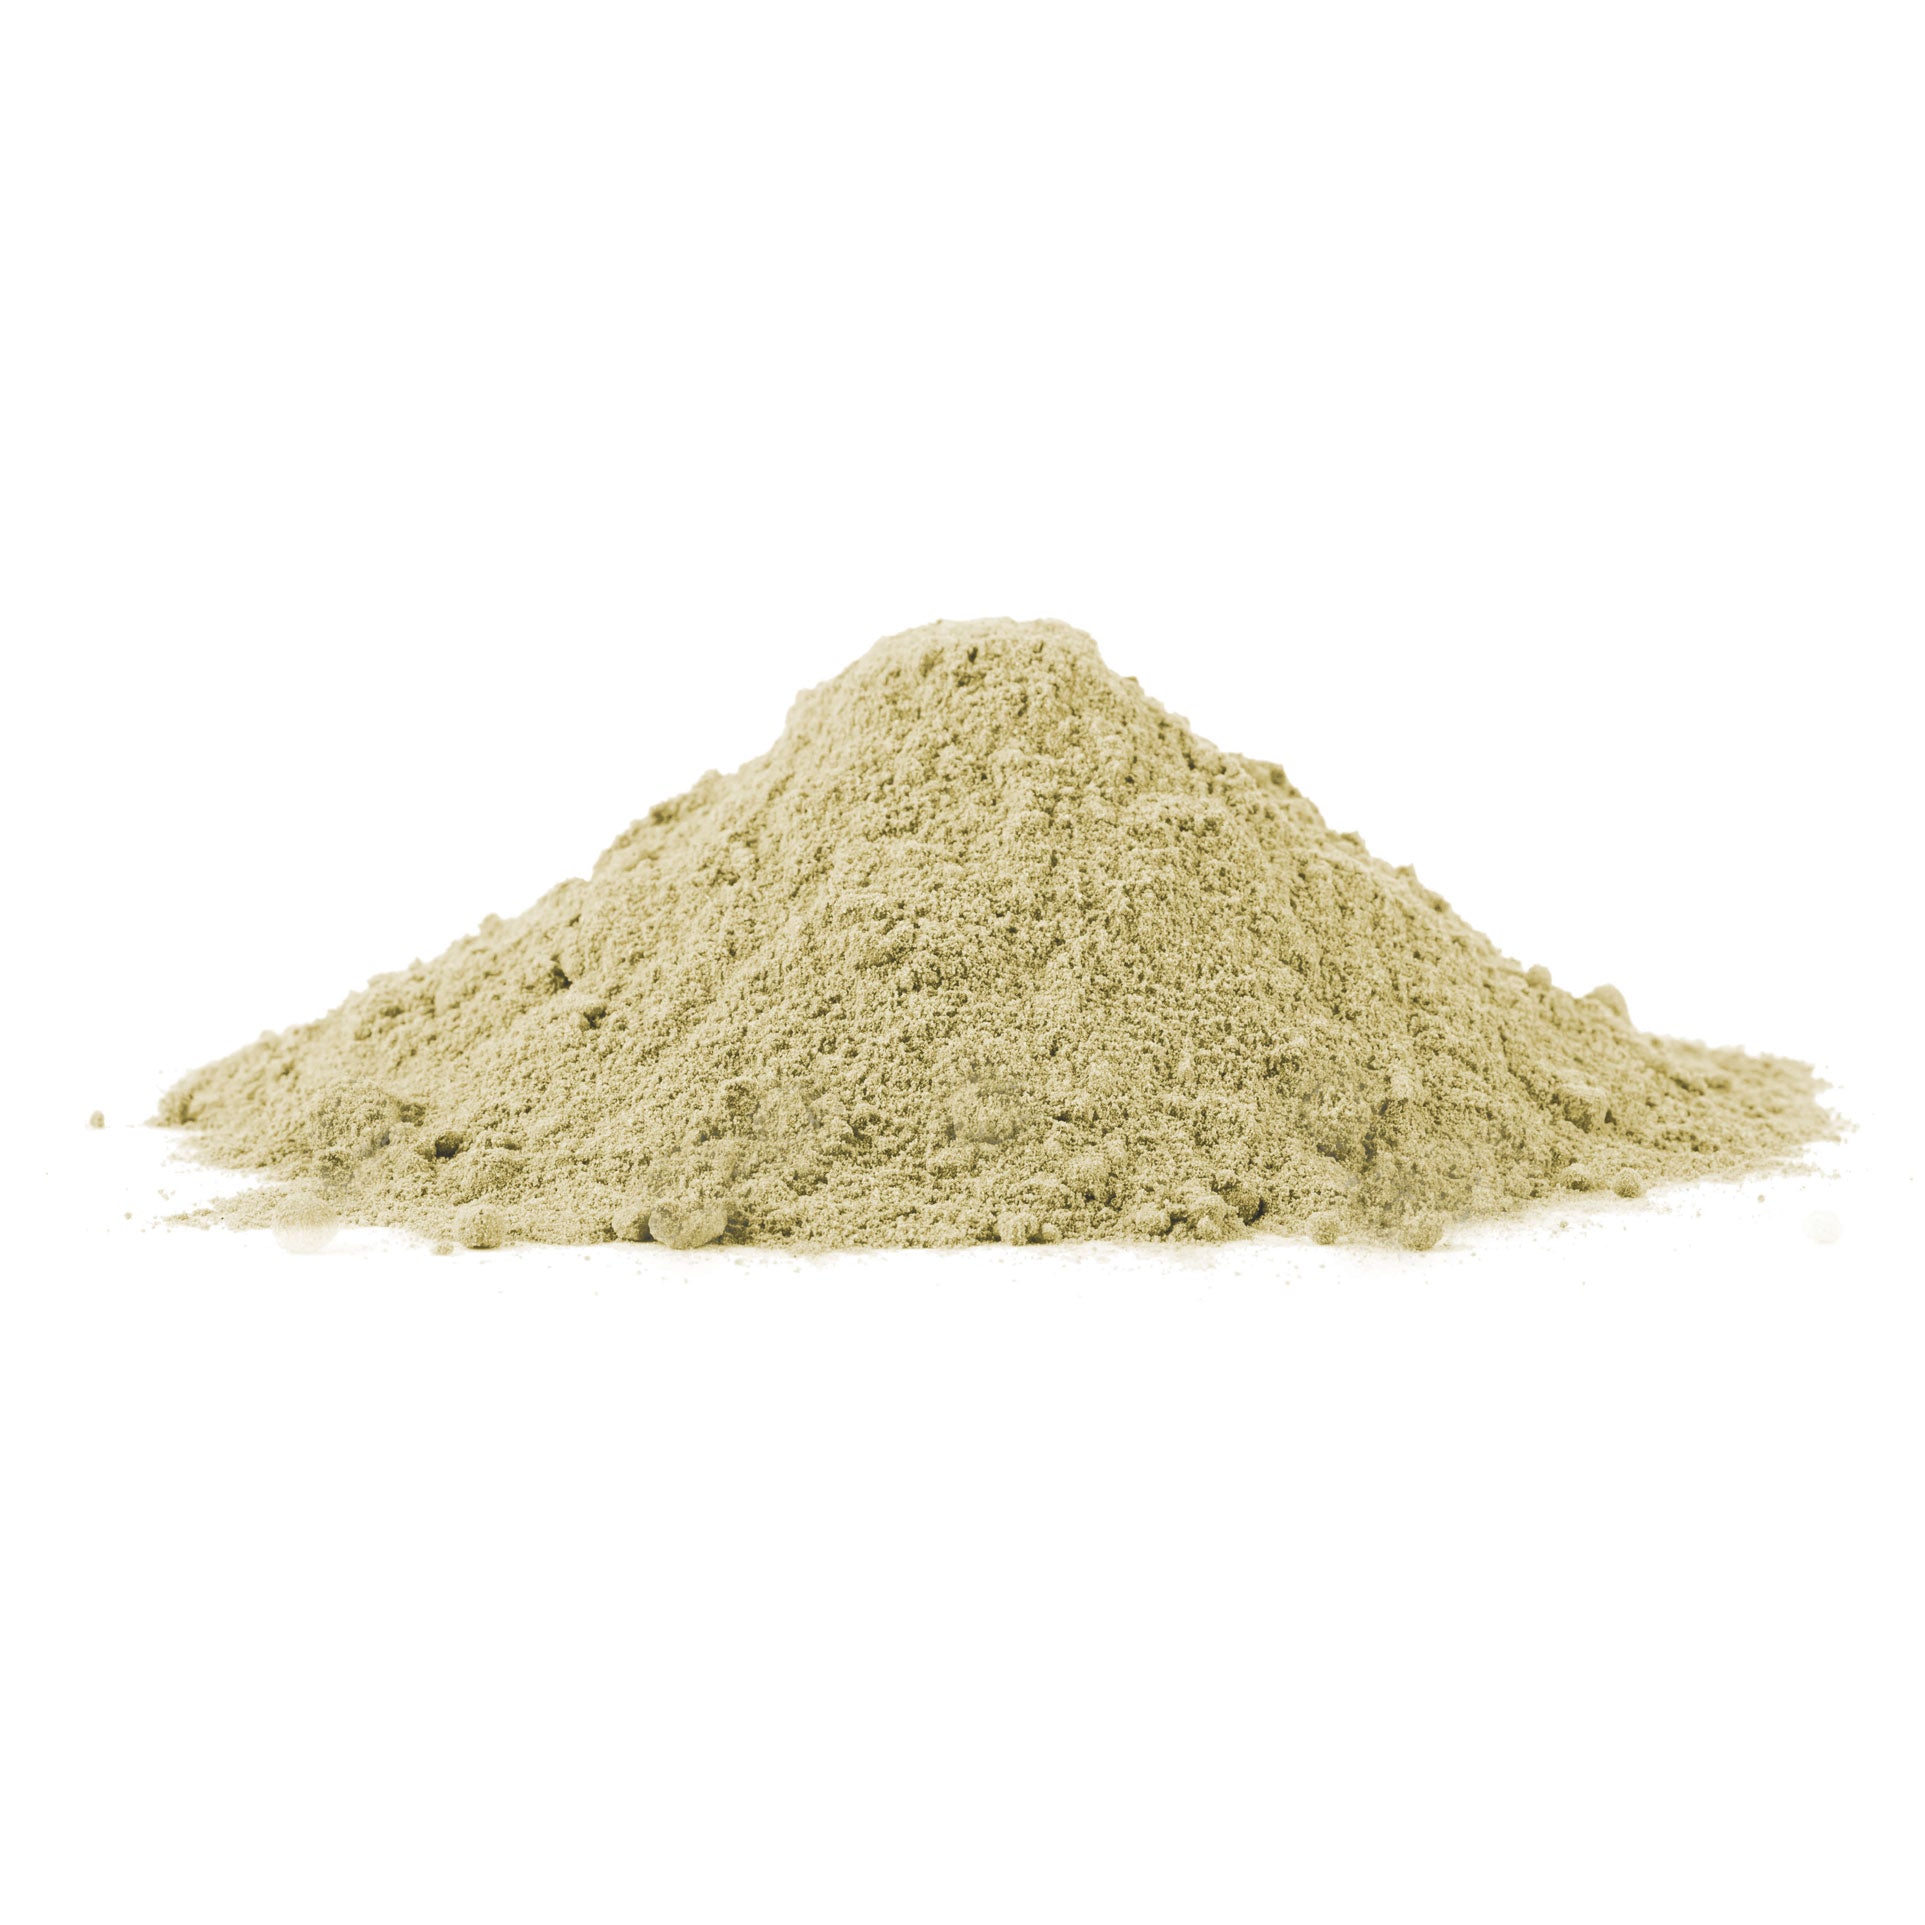 100% natural puppy supplement powder puppy prime supporting healthy bones, teeth, skin coat and muscle function. Provides dietary nutritional support rich in calcium, protein and multivitamins. Rich source of Omega-3, supporting joint and hip health. Grain free and sustainably sourced dietary supplement for dogs.